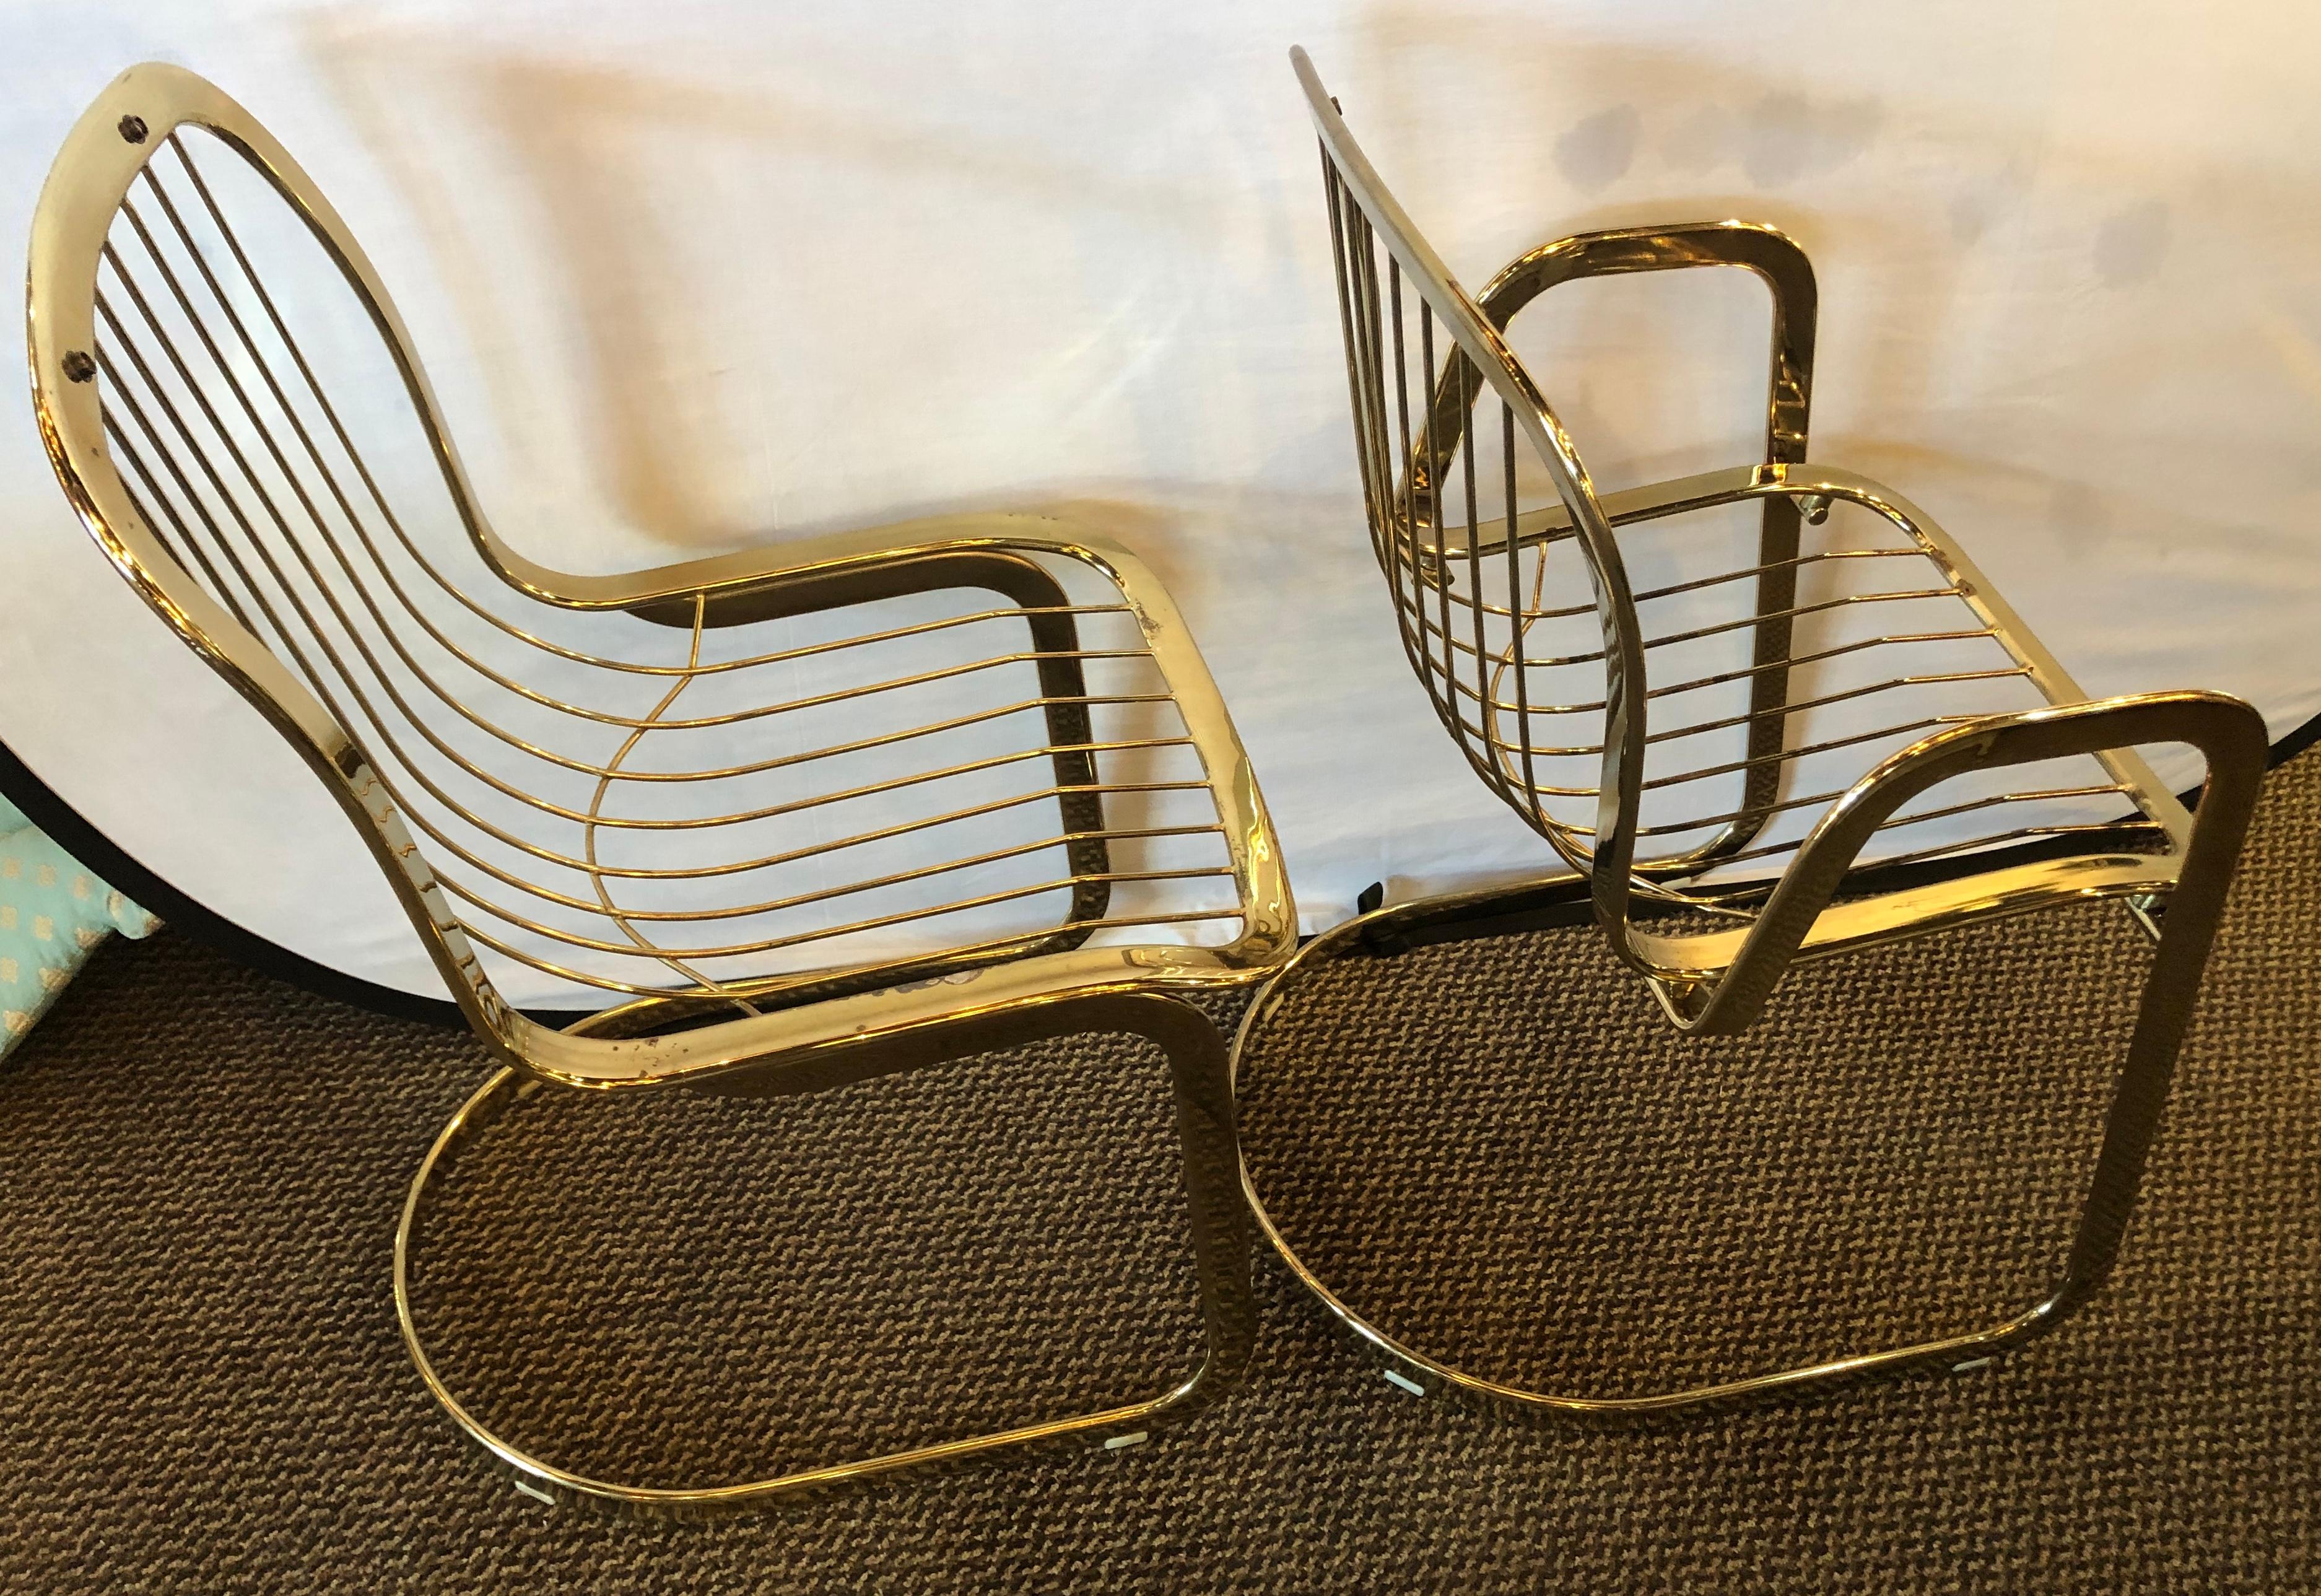 Willy Rizzo for Cidue 8 dining chairs, Italian, 1970s brass-plated metal labelled. These fine quality stylish dining chairs have one armchair and seven sides are custom quality and designed by this highly regarded designer. The high polished brass